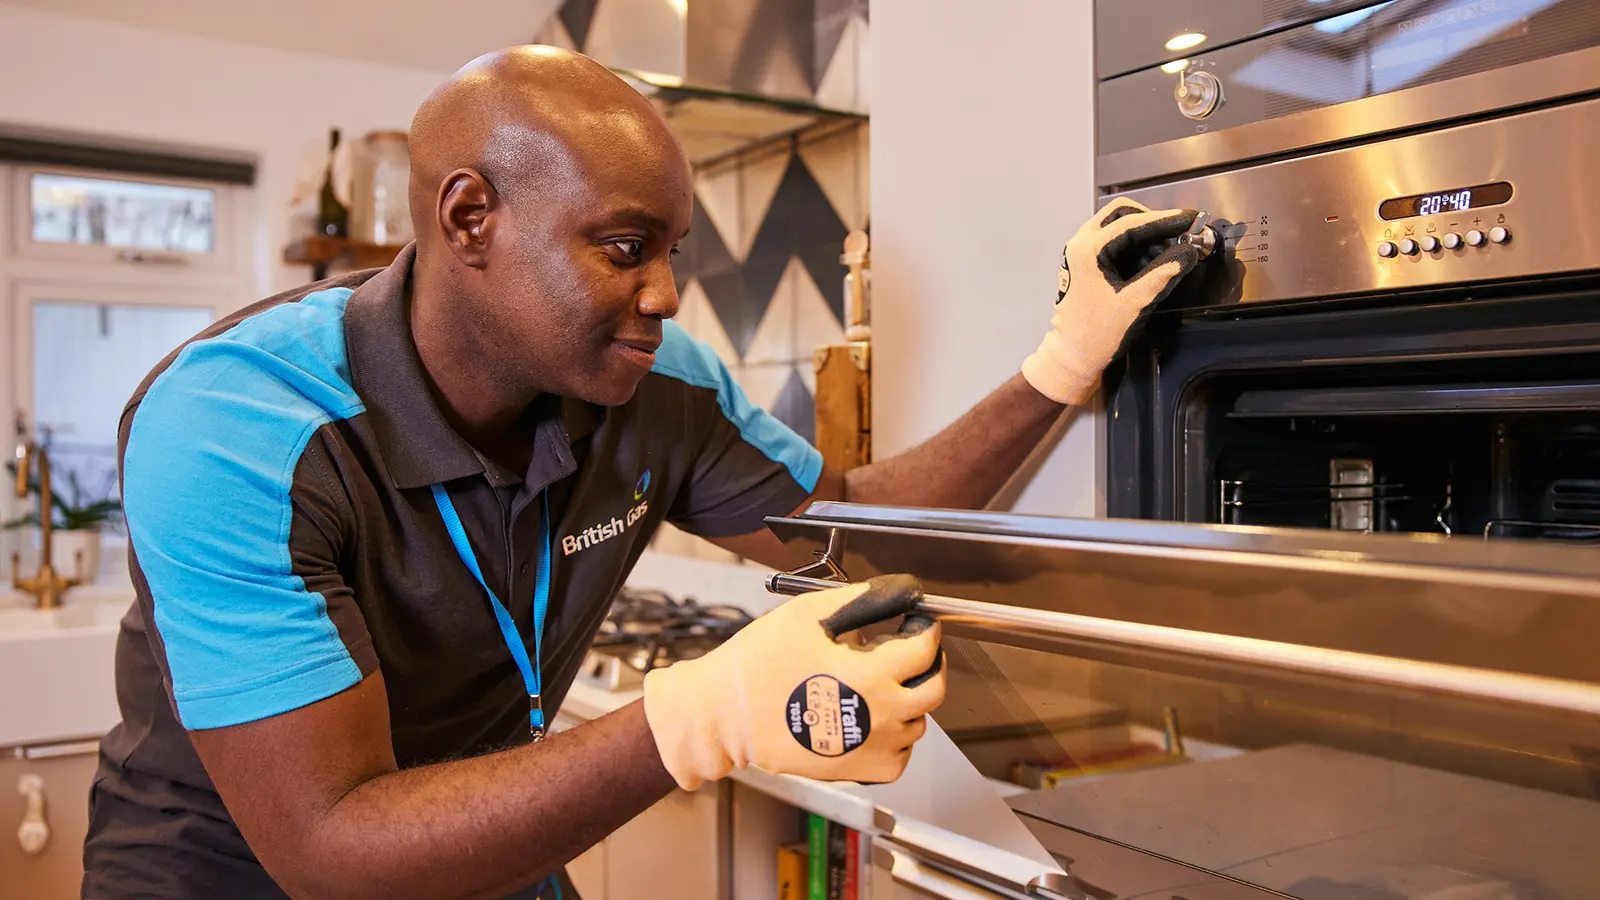 British Gas engineer fixing an appliance